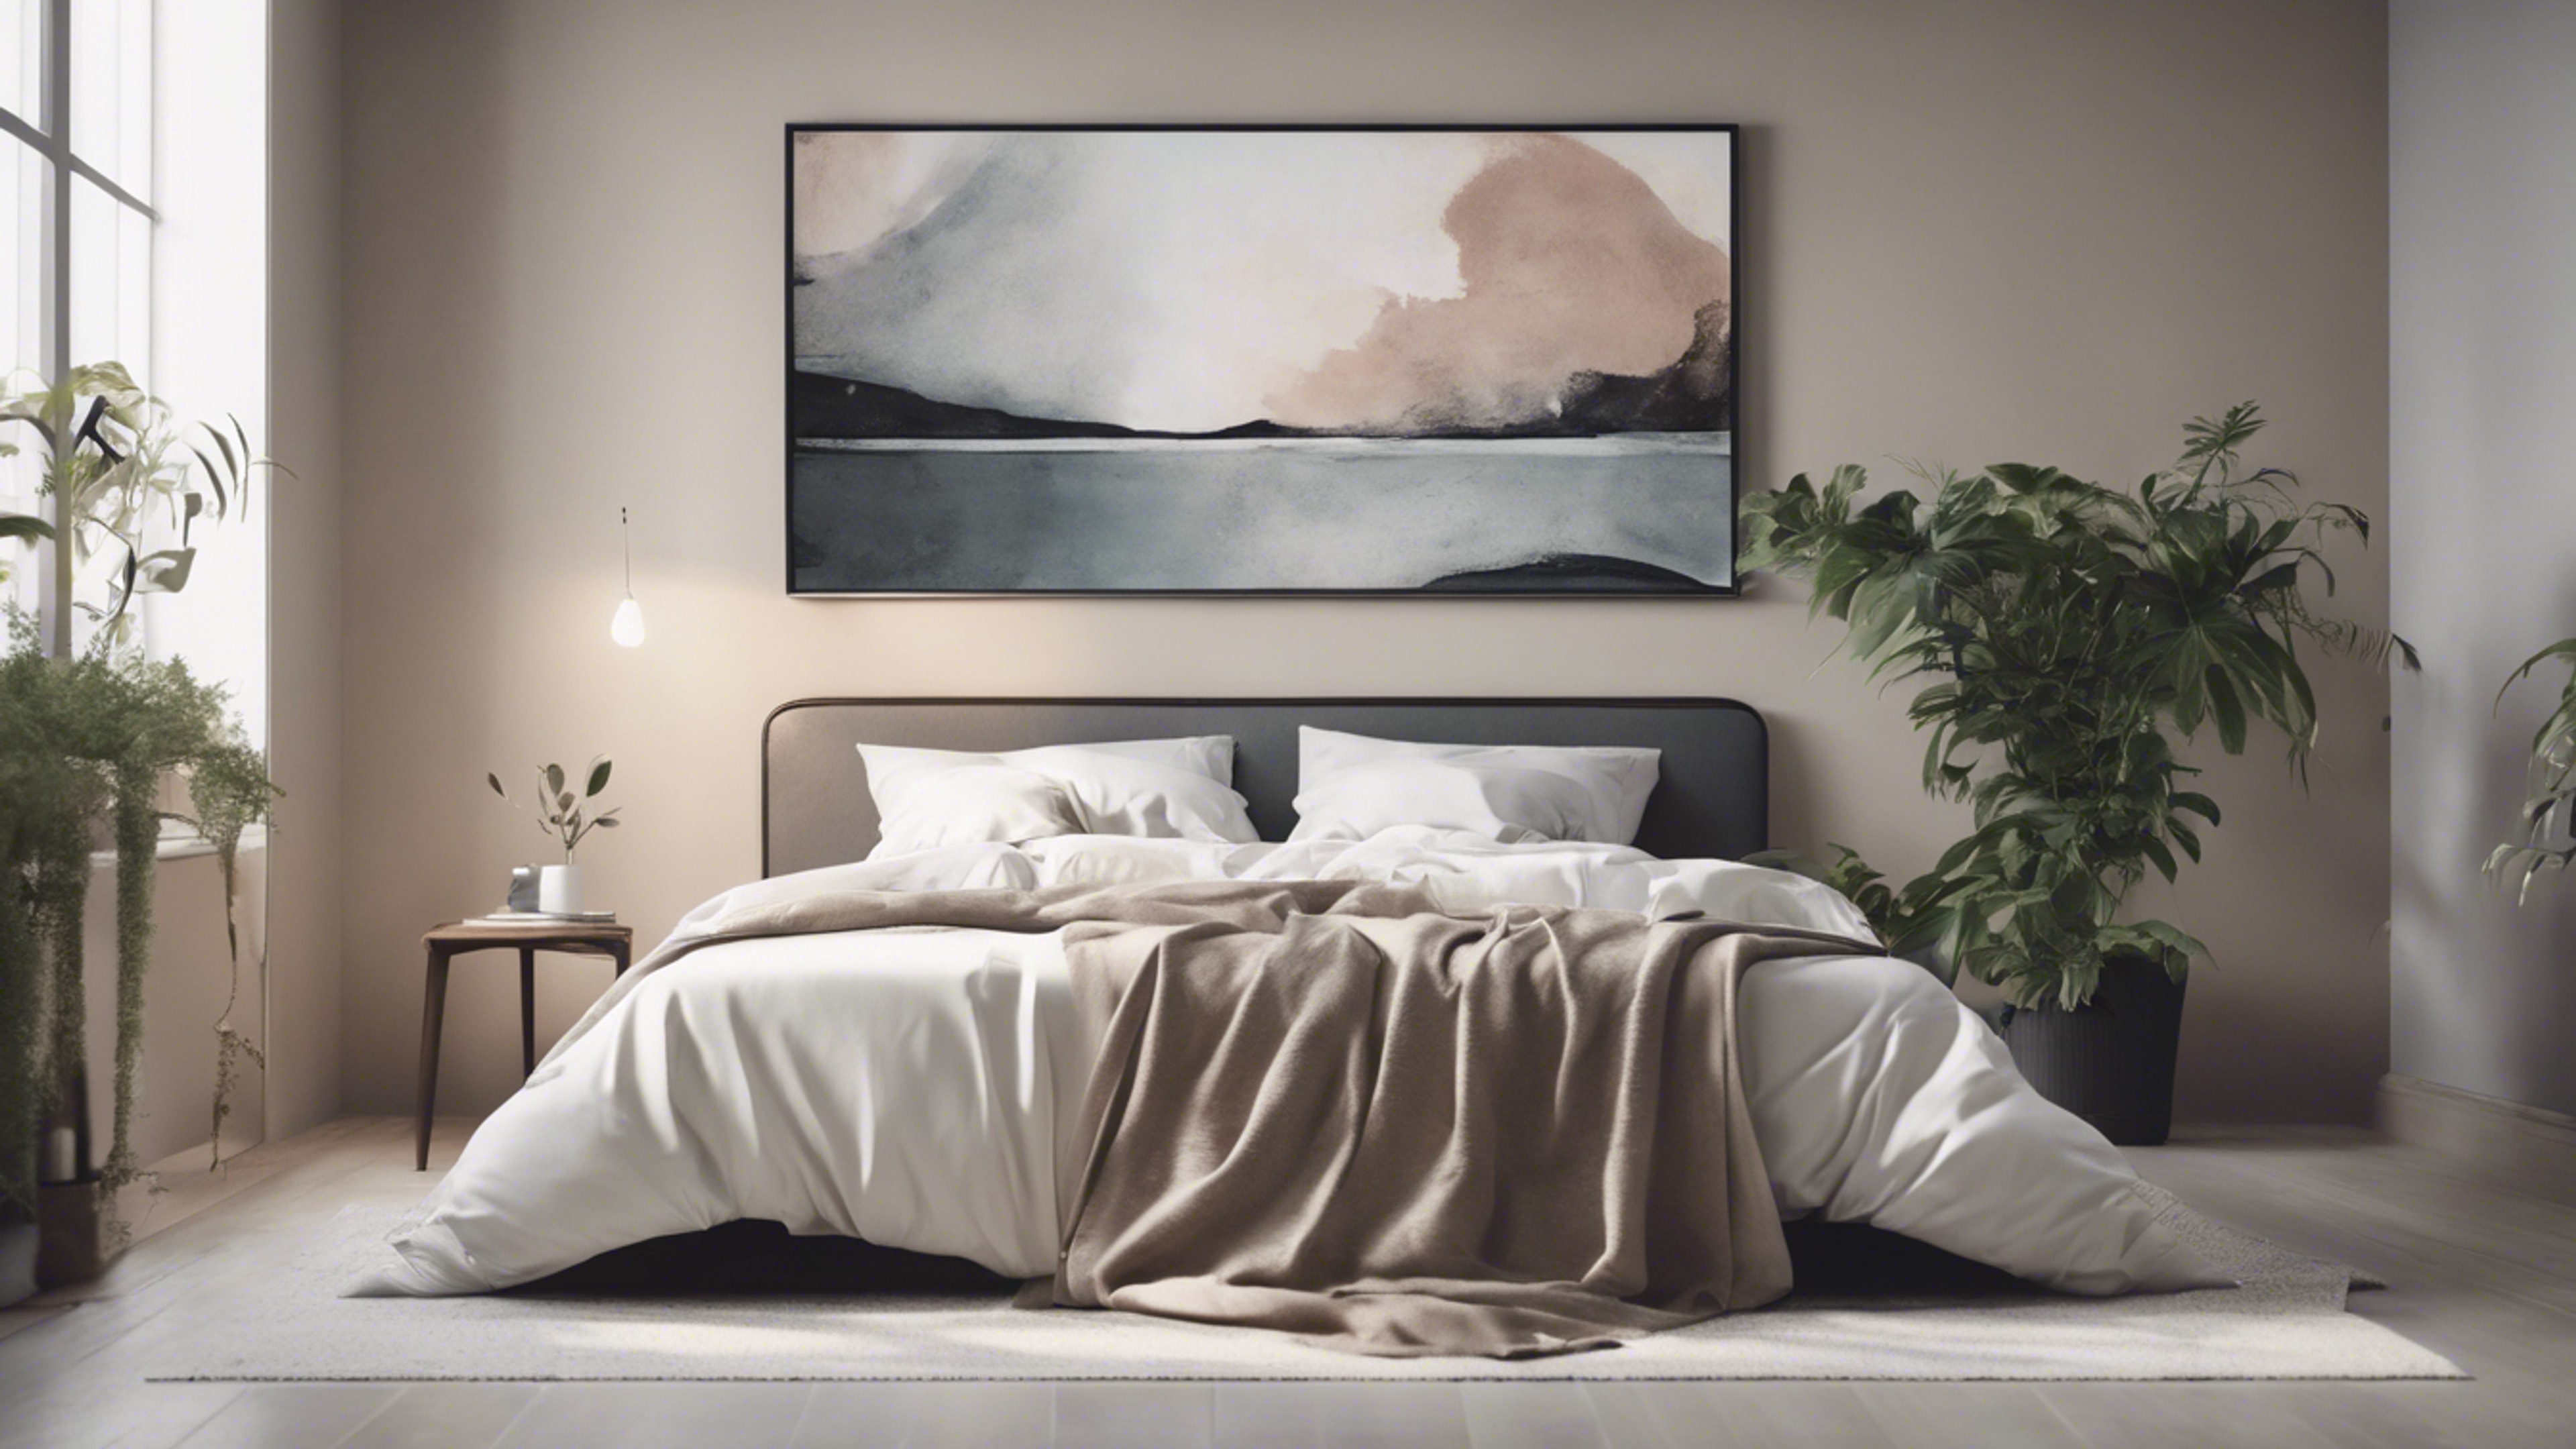 Minimalist bedroom in muted tones with a simple queen-sized bed, a potted plant, and an abstract painting.壁紙[015f6f42387b4ed28c5e]